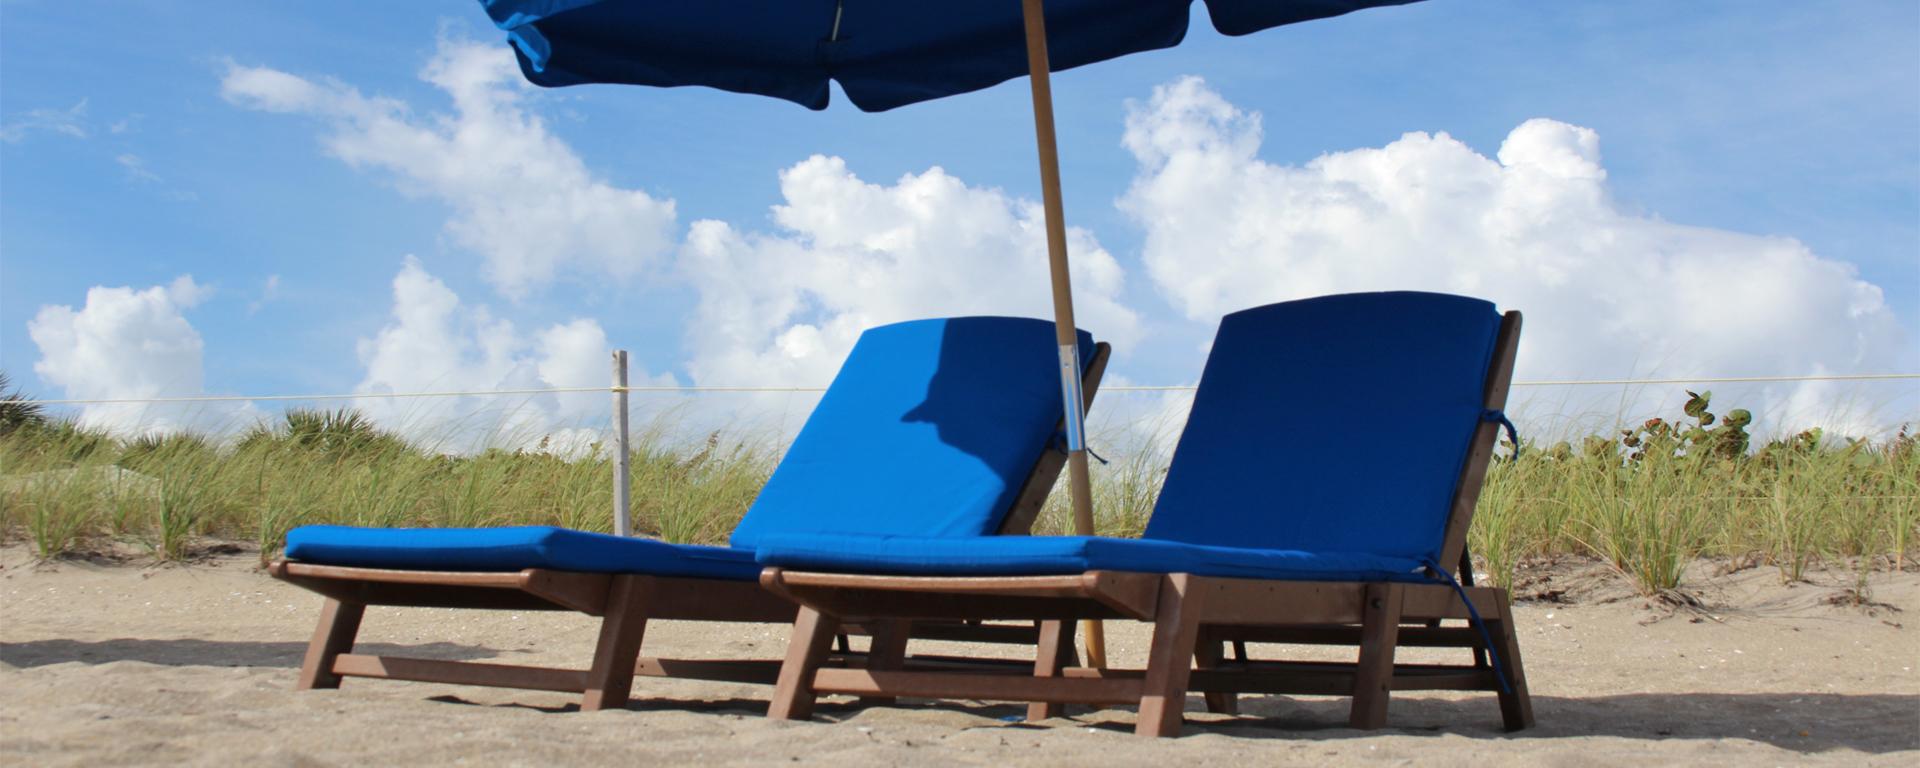 Modern Beach Chair Rentals Sunny Isles for Small Space